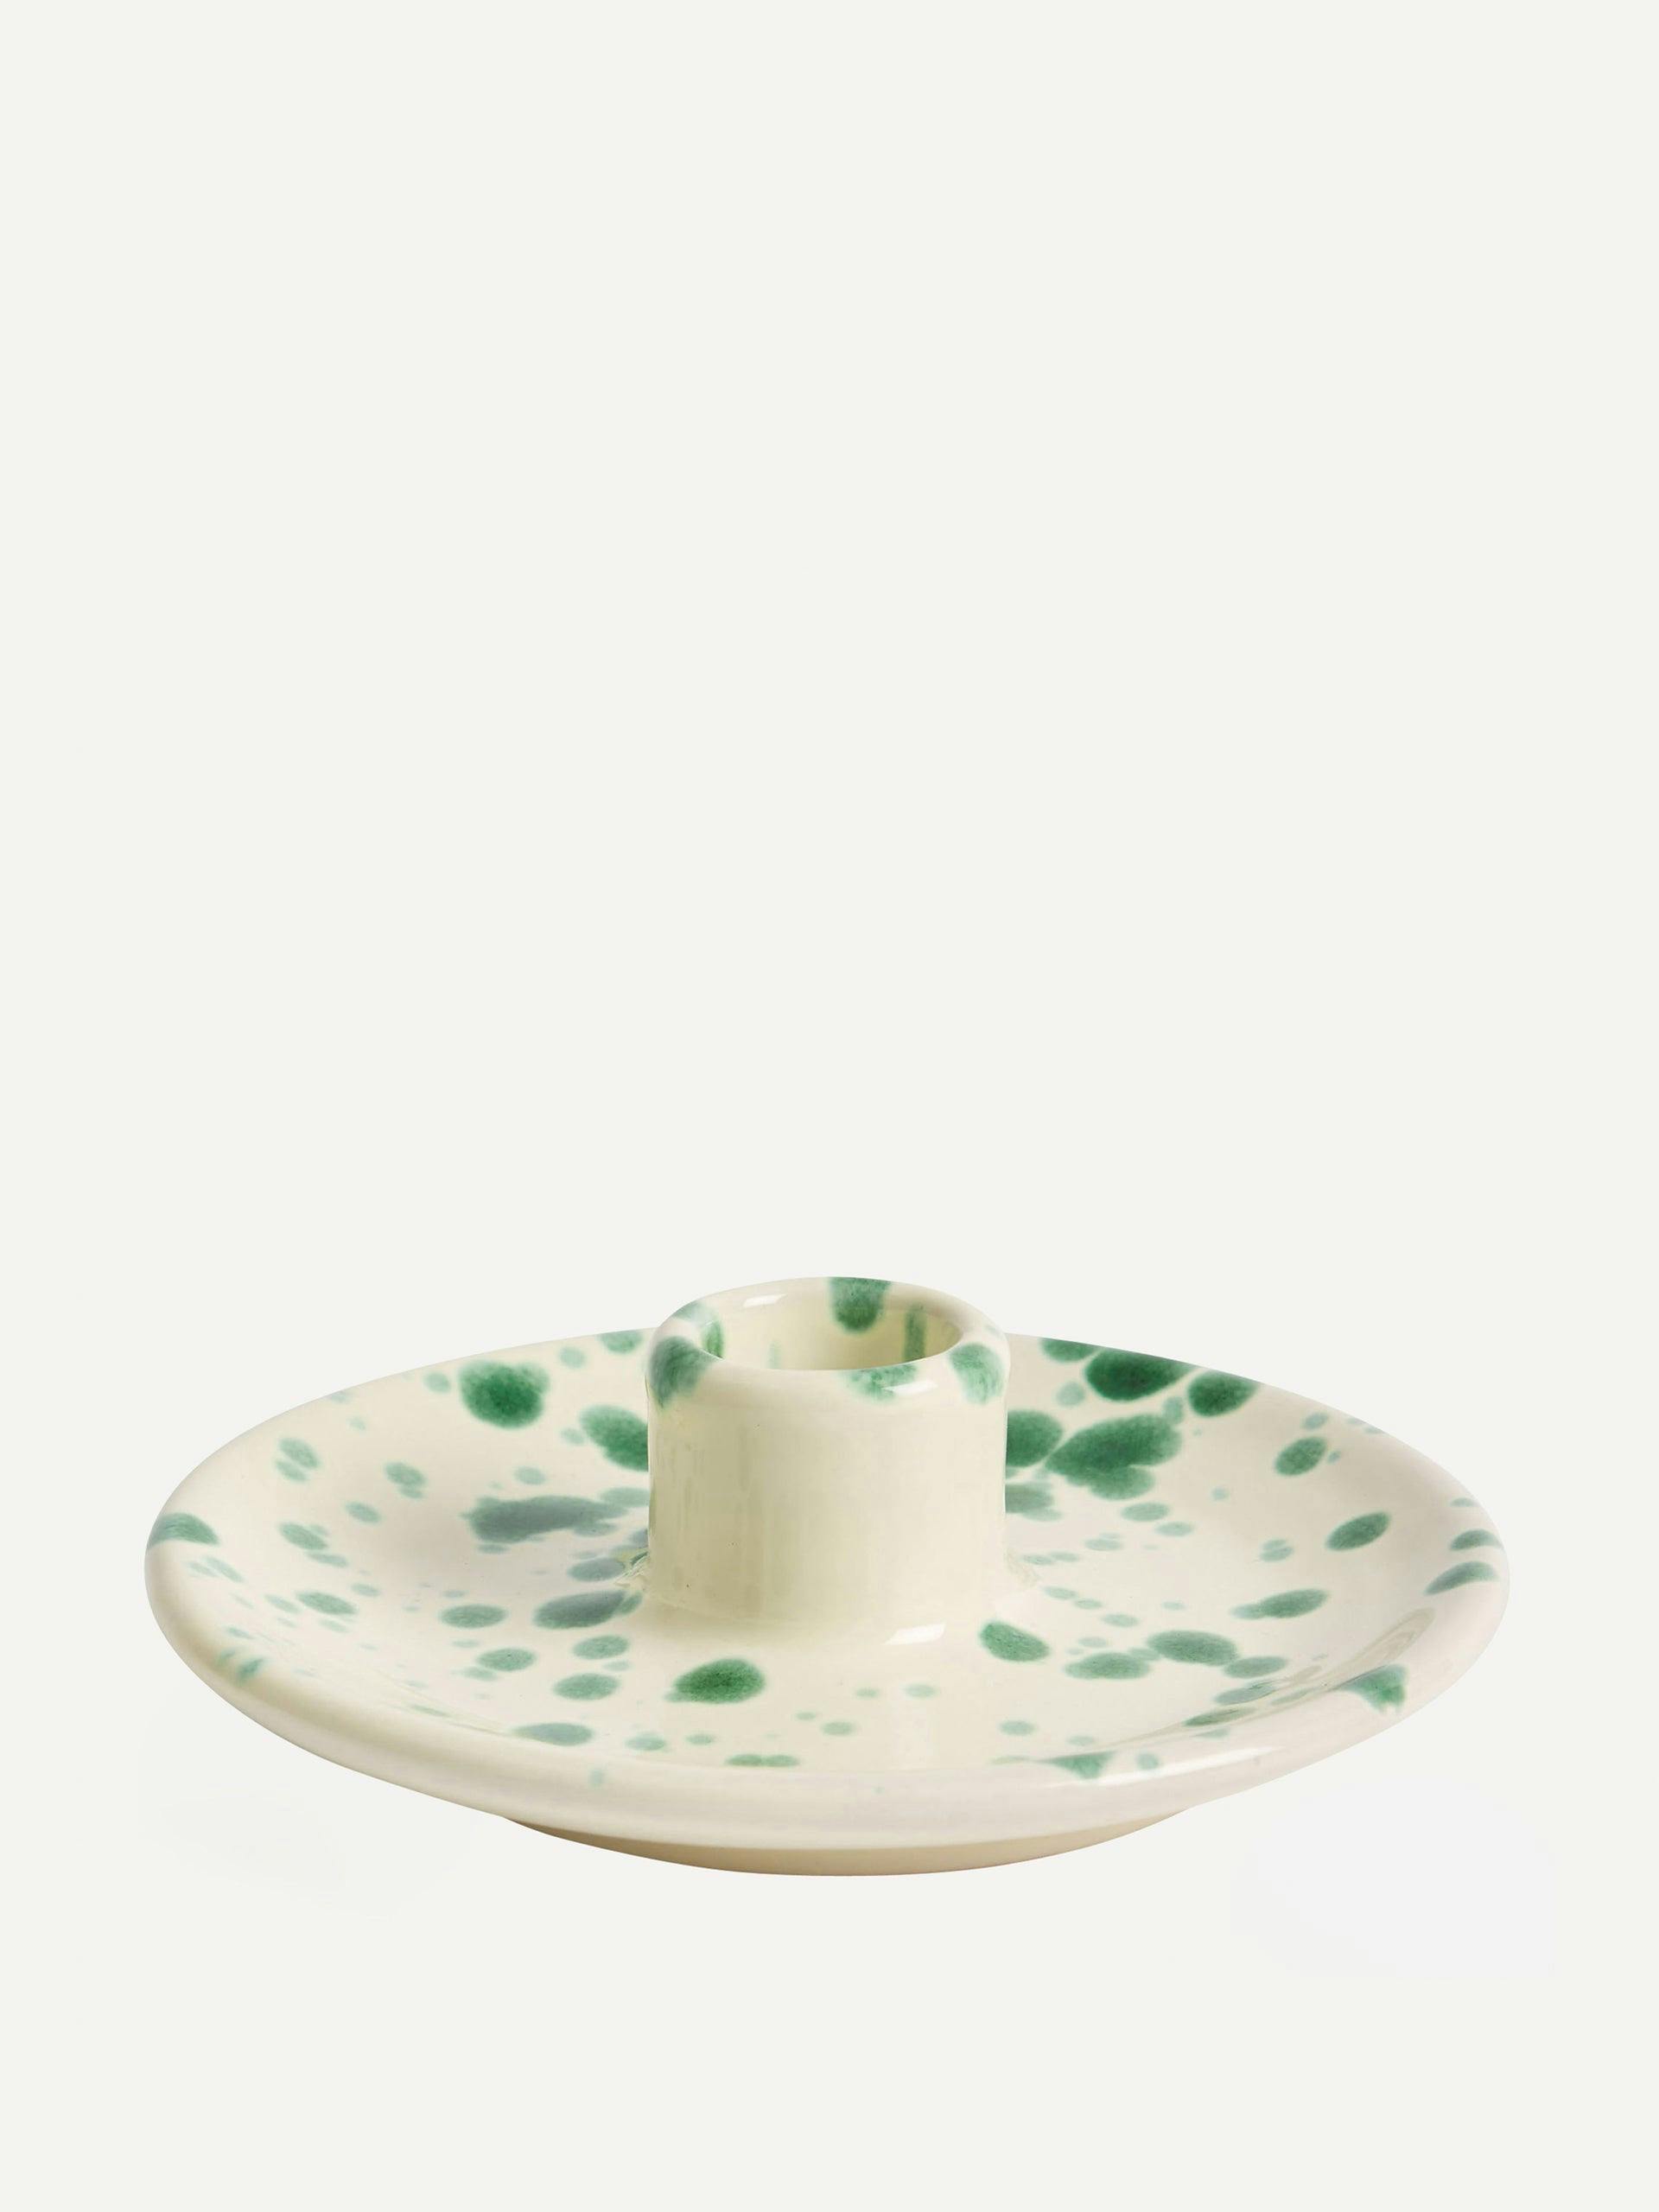 Candle holder in pistachio